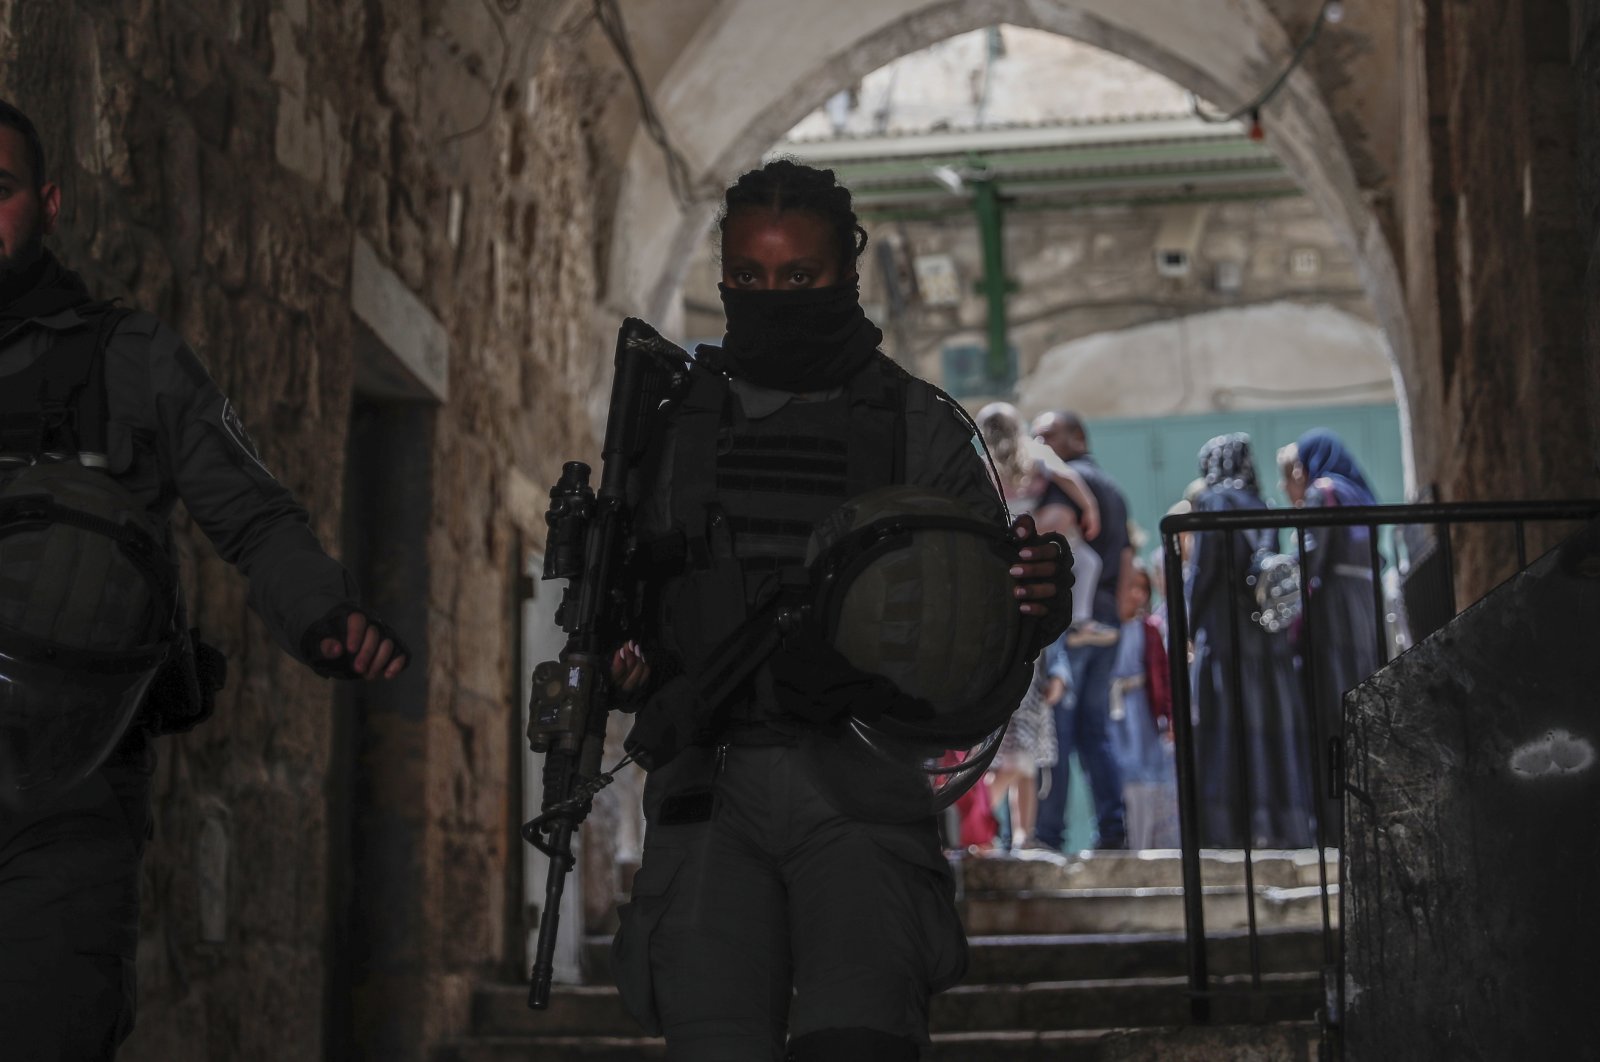 Israeli police block Muslims from the entrance to the Al-Aqsa Mosque compound in the Old City, East Jerusalem, occupied Palestine, May 5, 2022. (EPA File Photo)